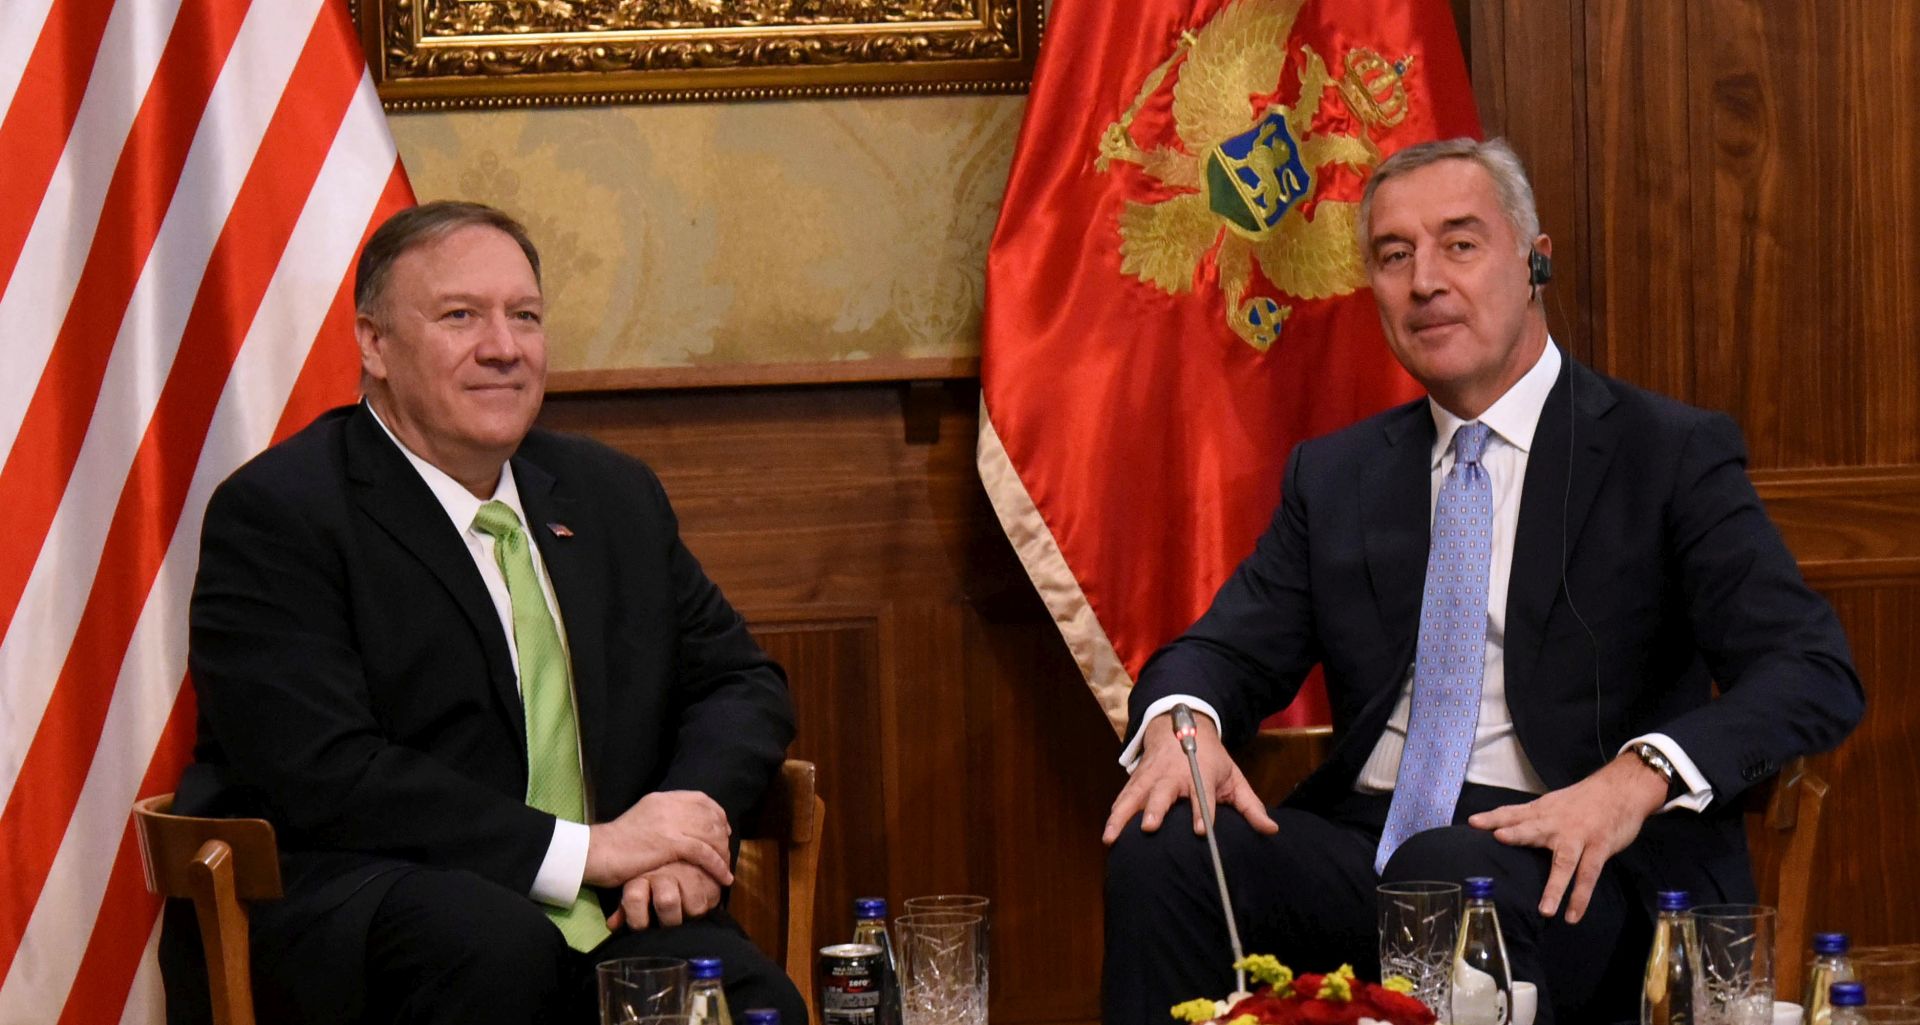 epa07894553 Montenegrian President Milo Djukanovic (R) and Secretary of State of the United States Mike Pompeo (L) talk during their meeting at Villa Gorica in Podgorica, Montenegro, 04 October 2019. Pompeo is on a tour of European countries from 01 to 06 October.  EPA/BORIS PEJOVIC